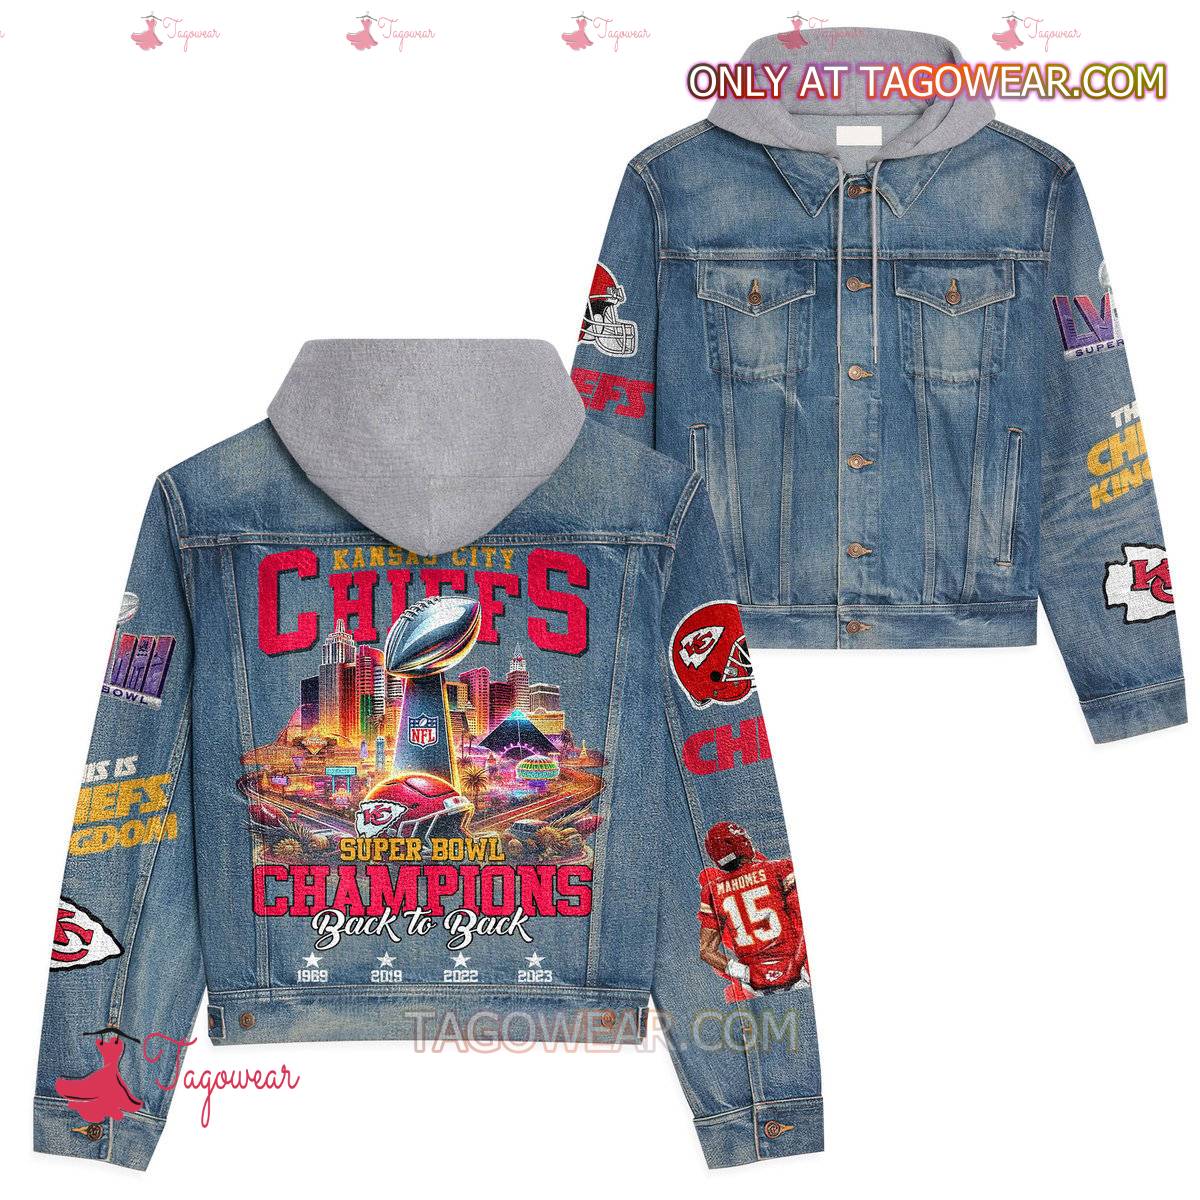 Kansas City Chiefs Super Bowl Champions Back To Back Jean Hoodie Jacket